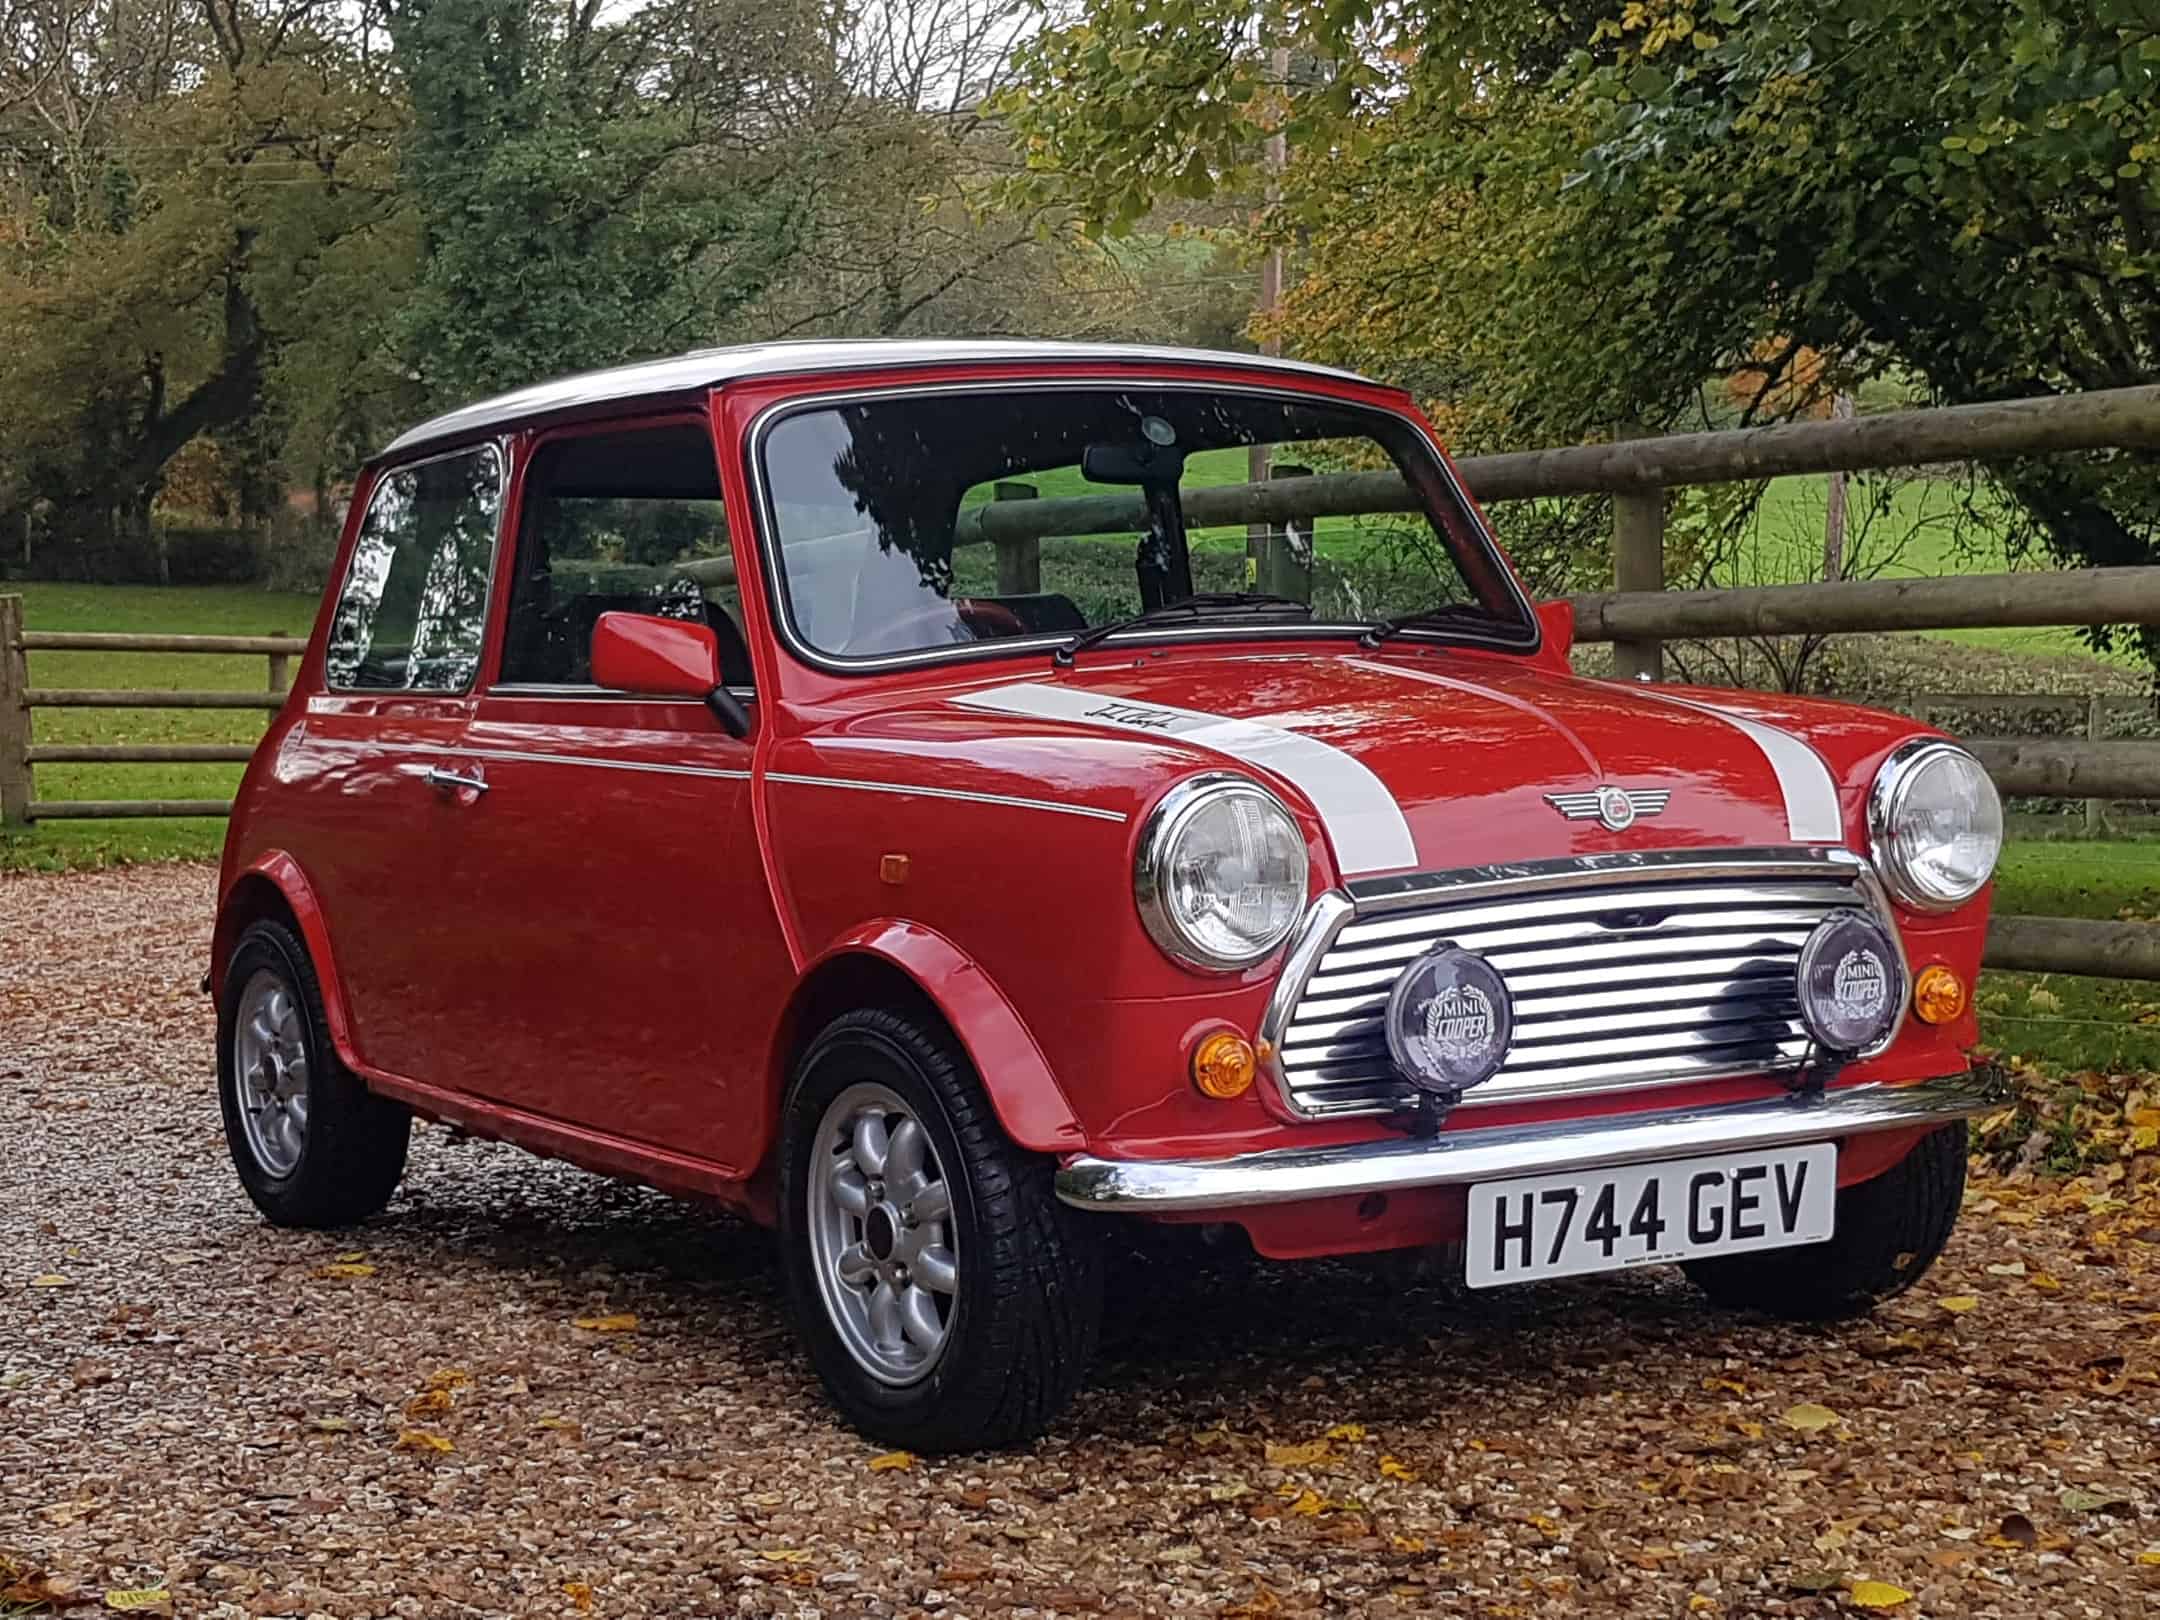 ** NOW SOLD ** 1990 Rover Mini Cooper RSP On Just 970 Miles From New